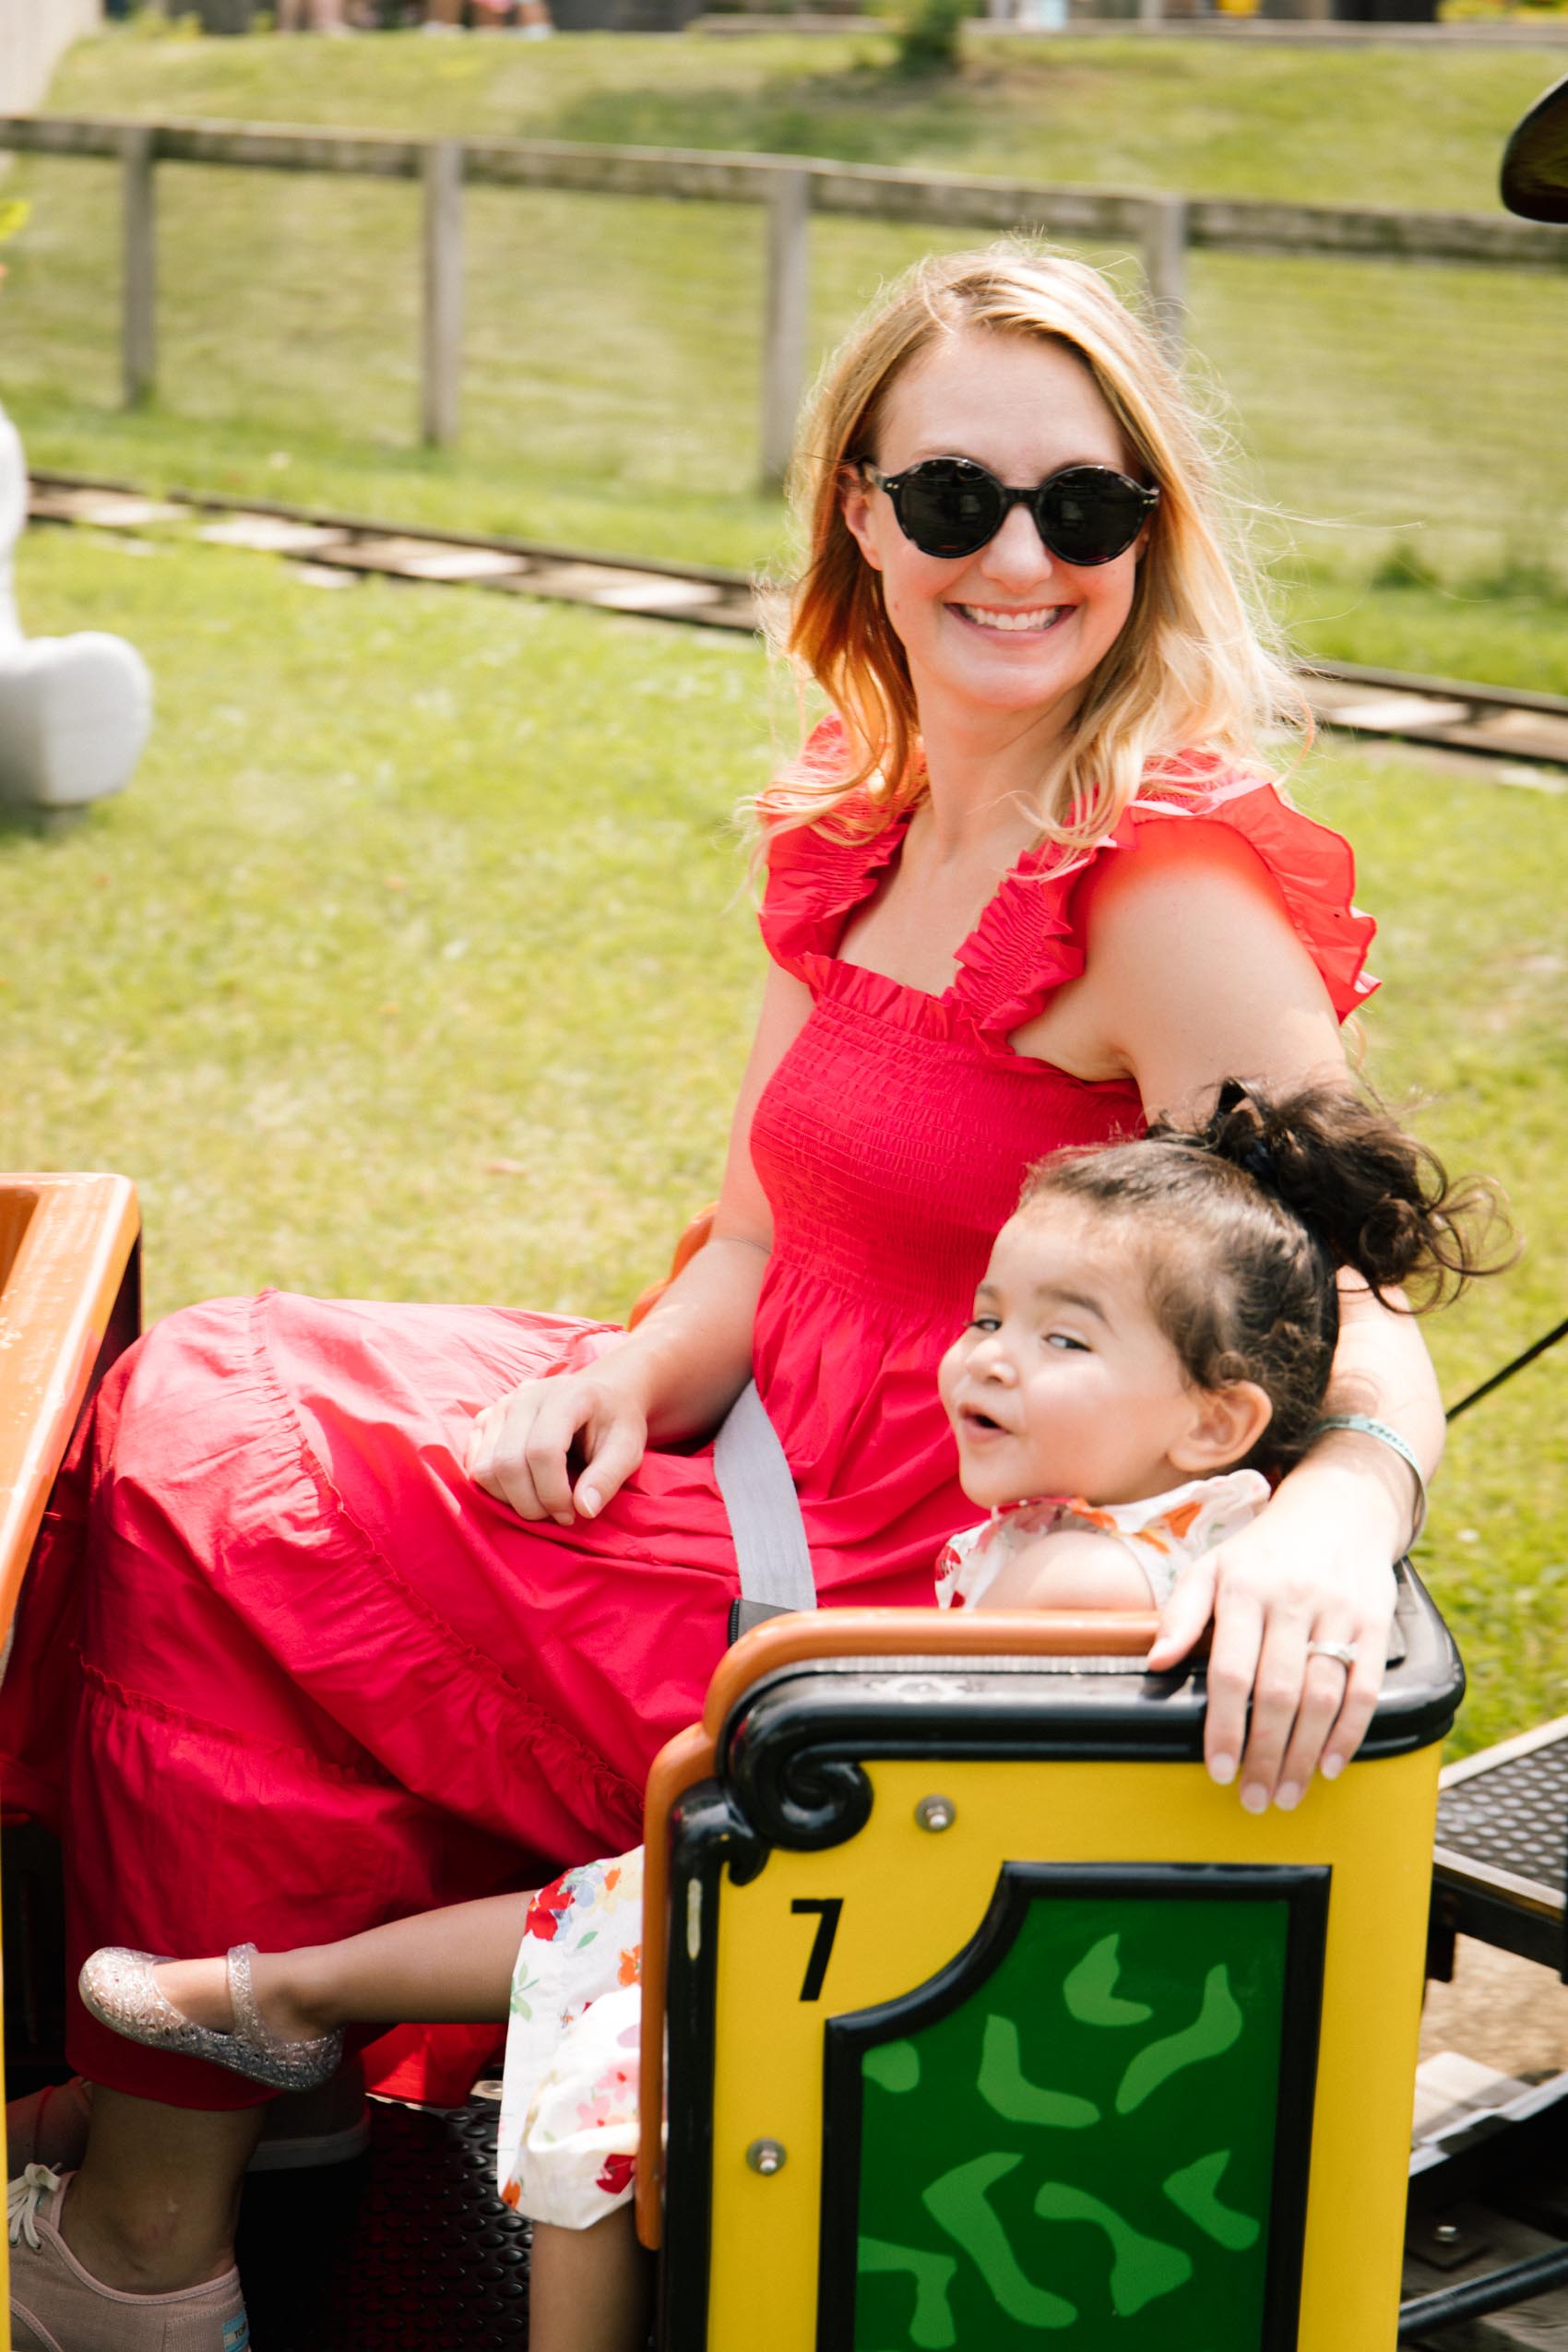 Woman wearing a red dress sitting next to a toddler on a kids' train ride